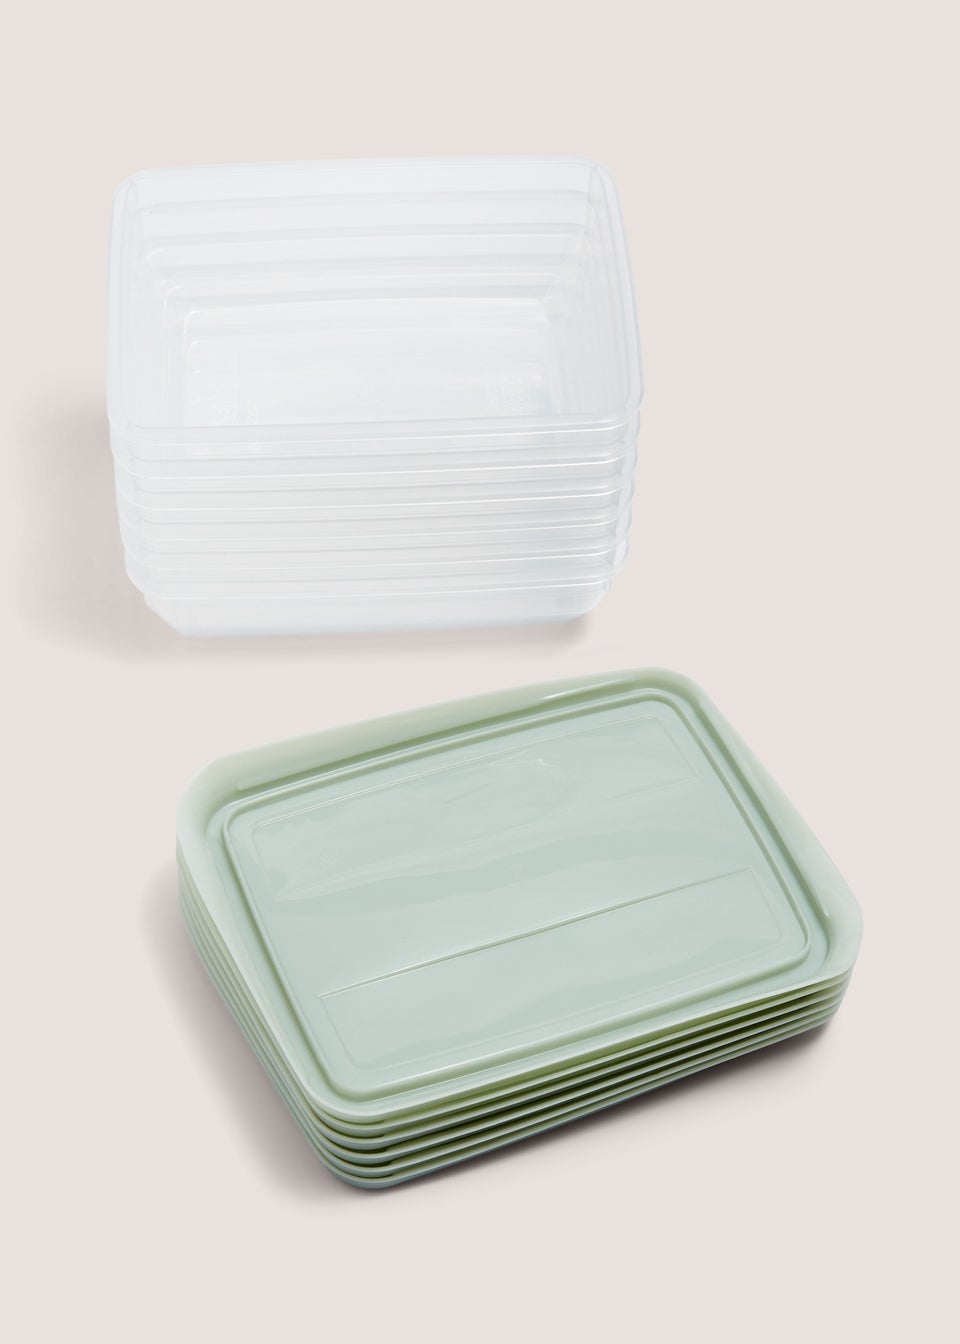 6 Pack Green Containers (15cm x 11cm x 4.5cm)